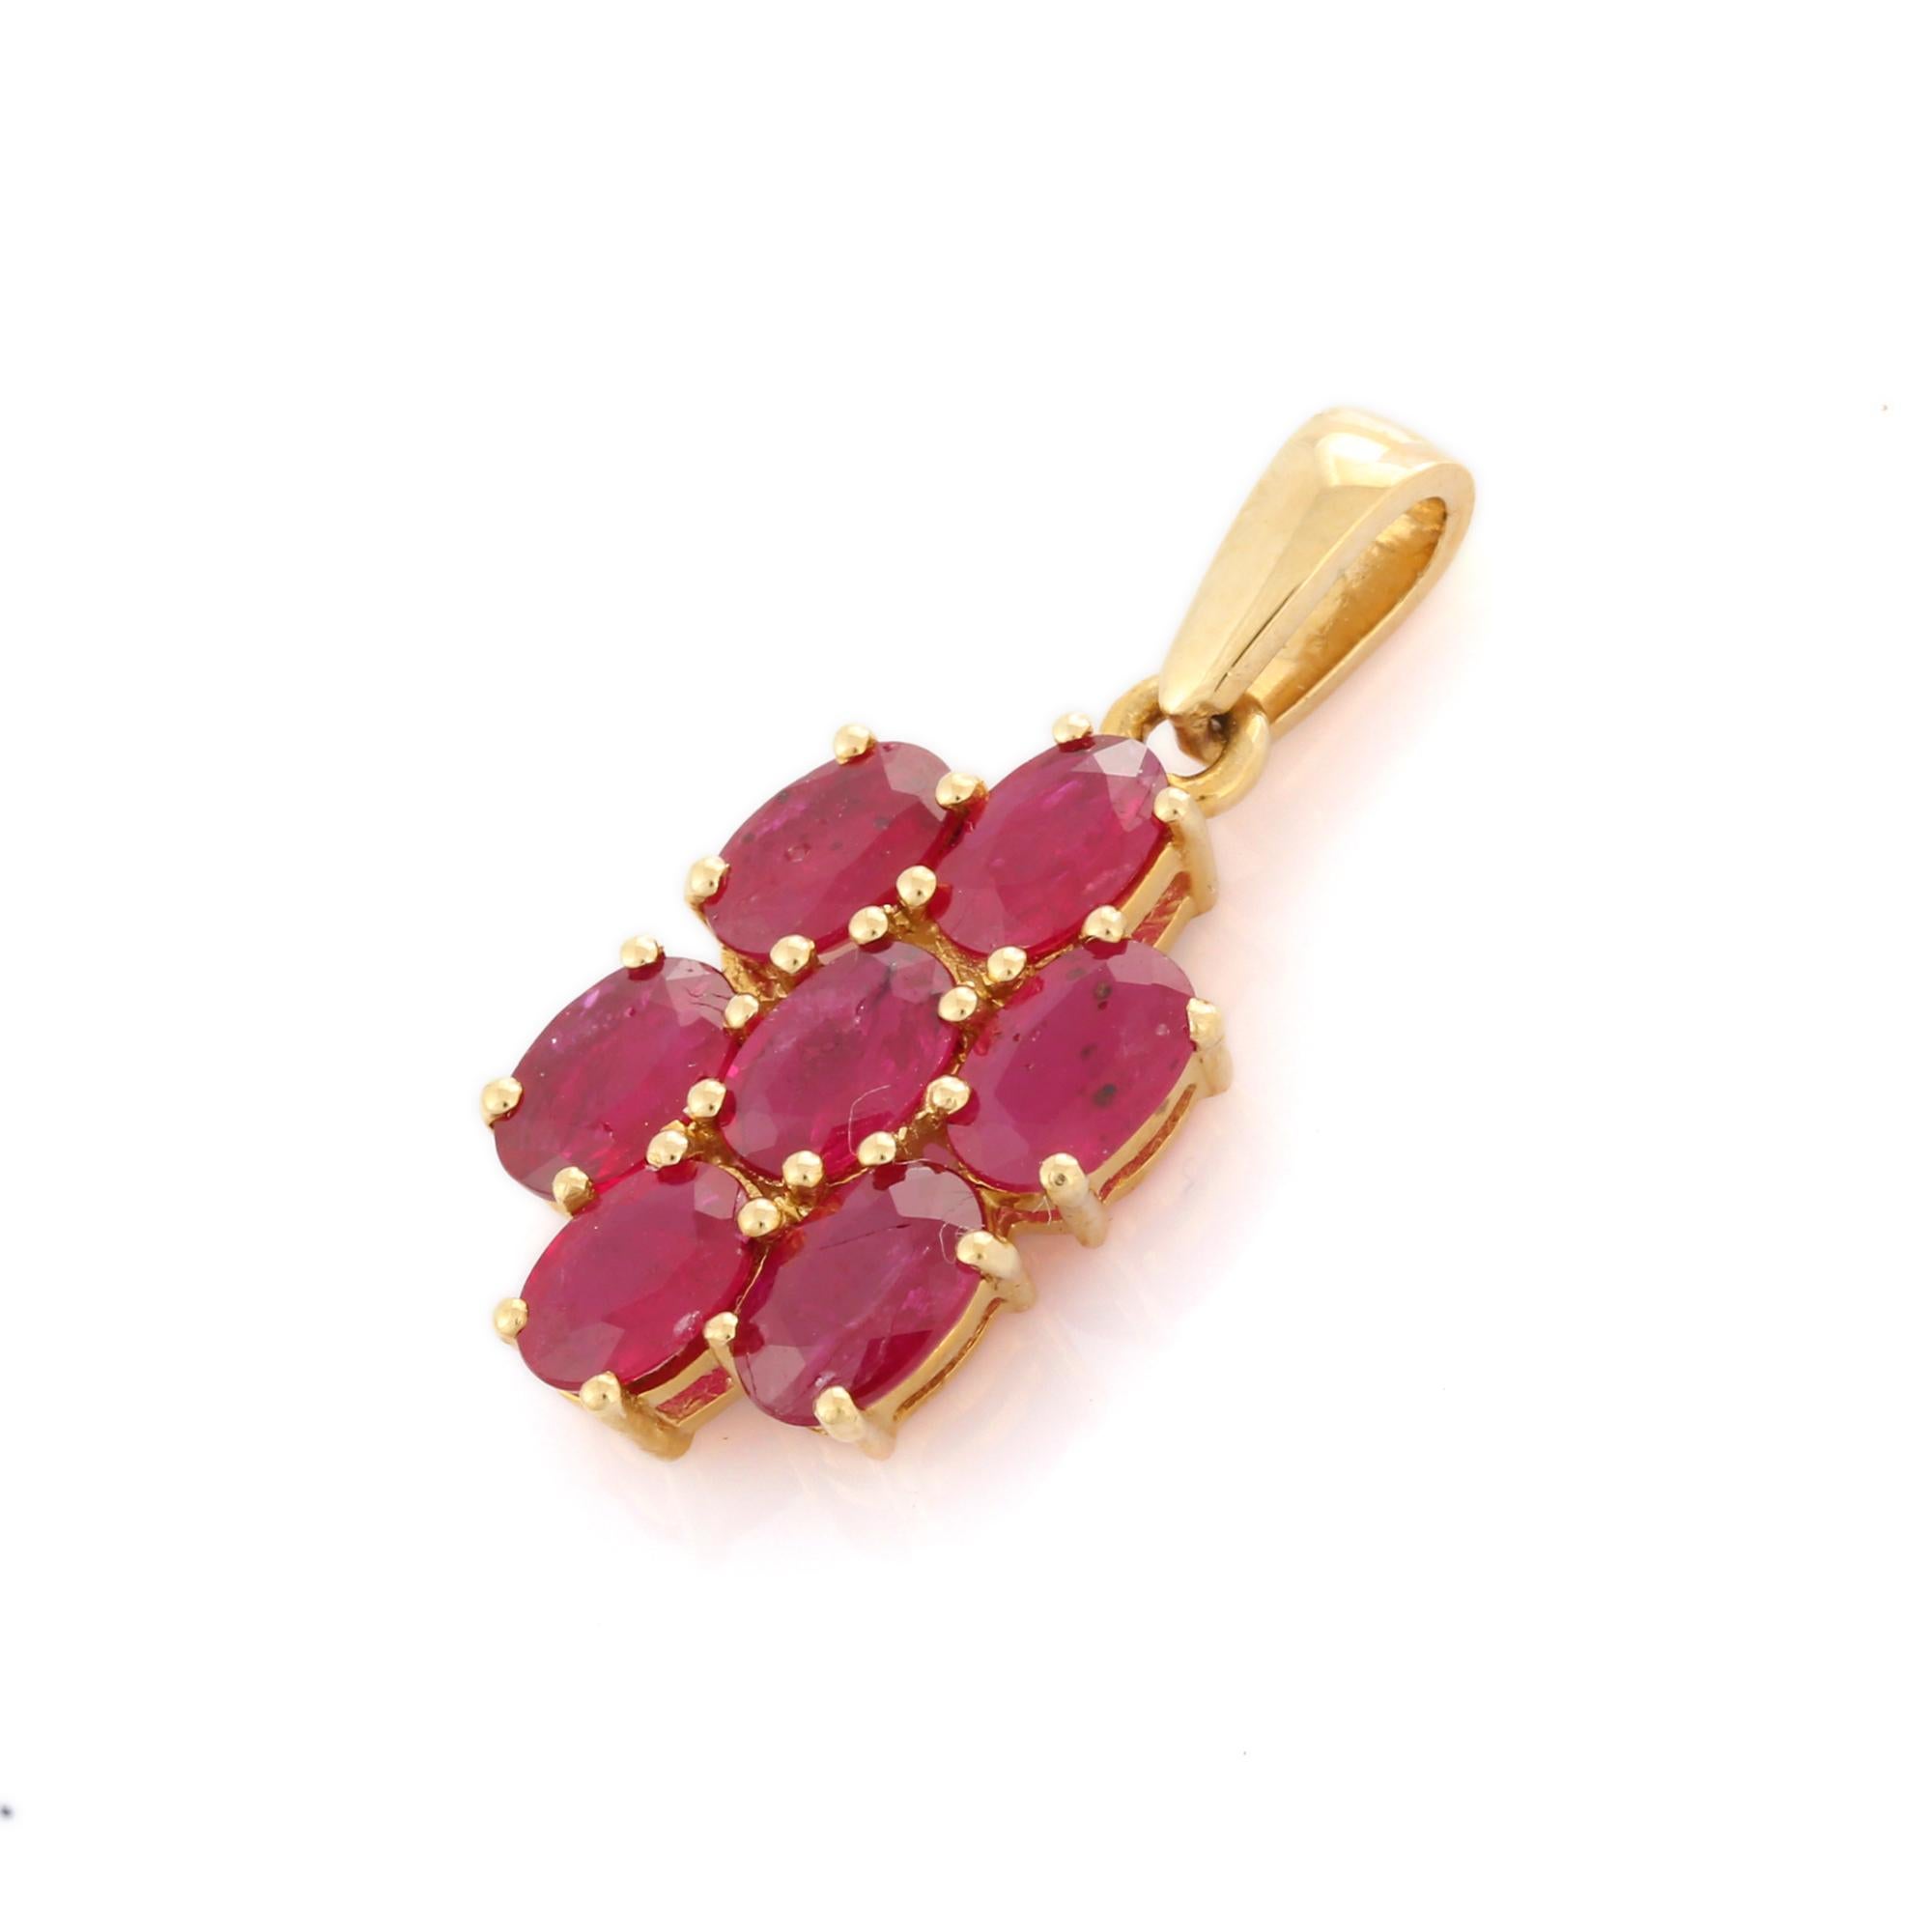 Alluring ruby flower pendant in 14K Gold. It has oval cut rubies that completes your look with a decent touch. Pendants are used to wear or gifted to represent love and promises. It's an attractive jewelry piece that goes with every basic outfit and